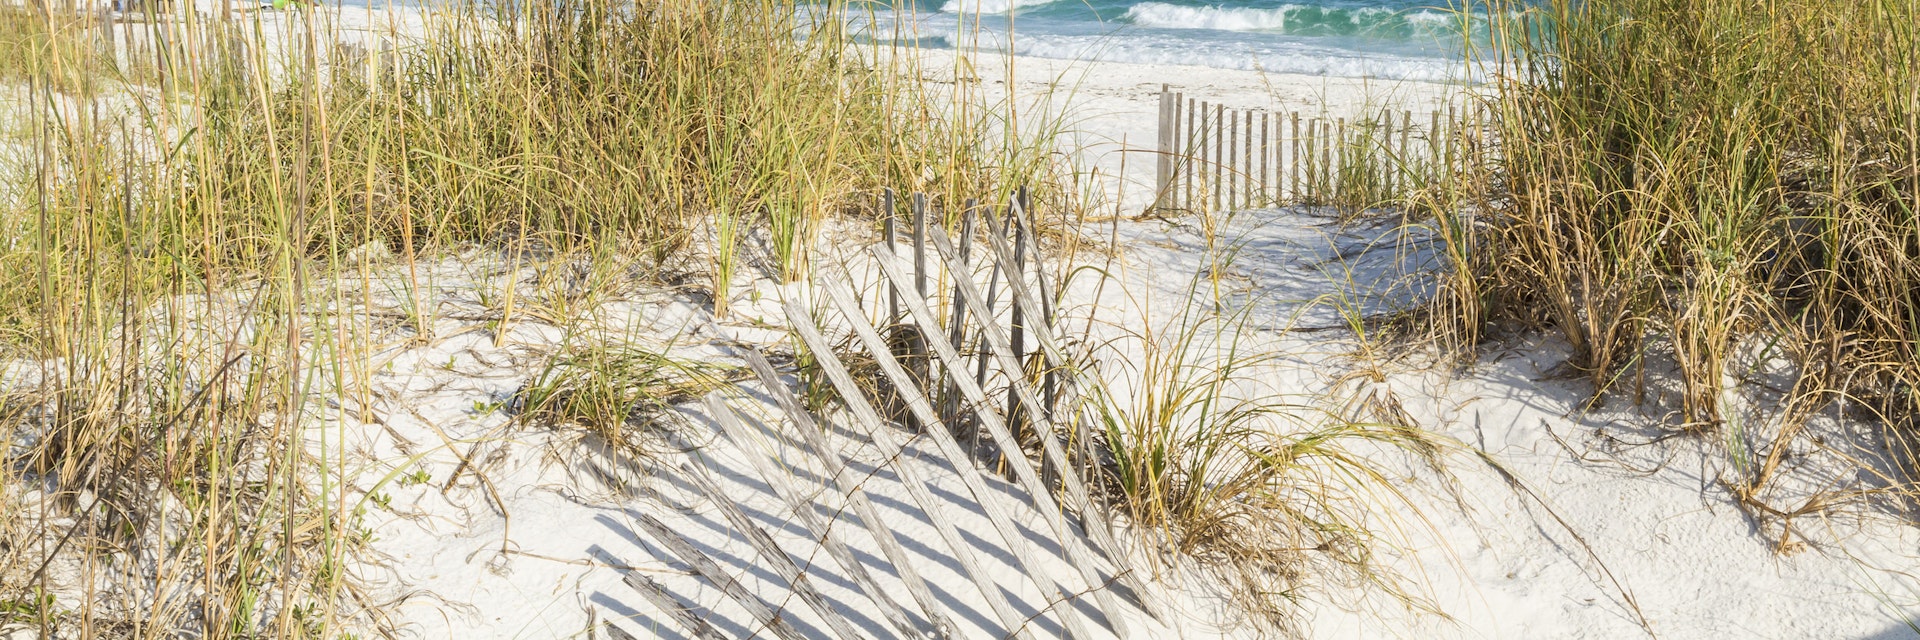 Dune fence and sea oats on the dunes at Pensacola Beach, Florida on Gulf Islands National Seashore.; Shutterstock ID 217923022; Your name (First / Last): Emma Sparks; GL account no.: 65050; Netsuite department name: Online Editorial; Full Product or Project name including edition: Best_in_the_US_POIs